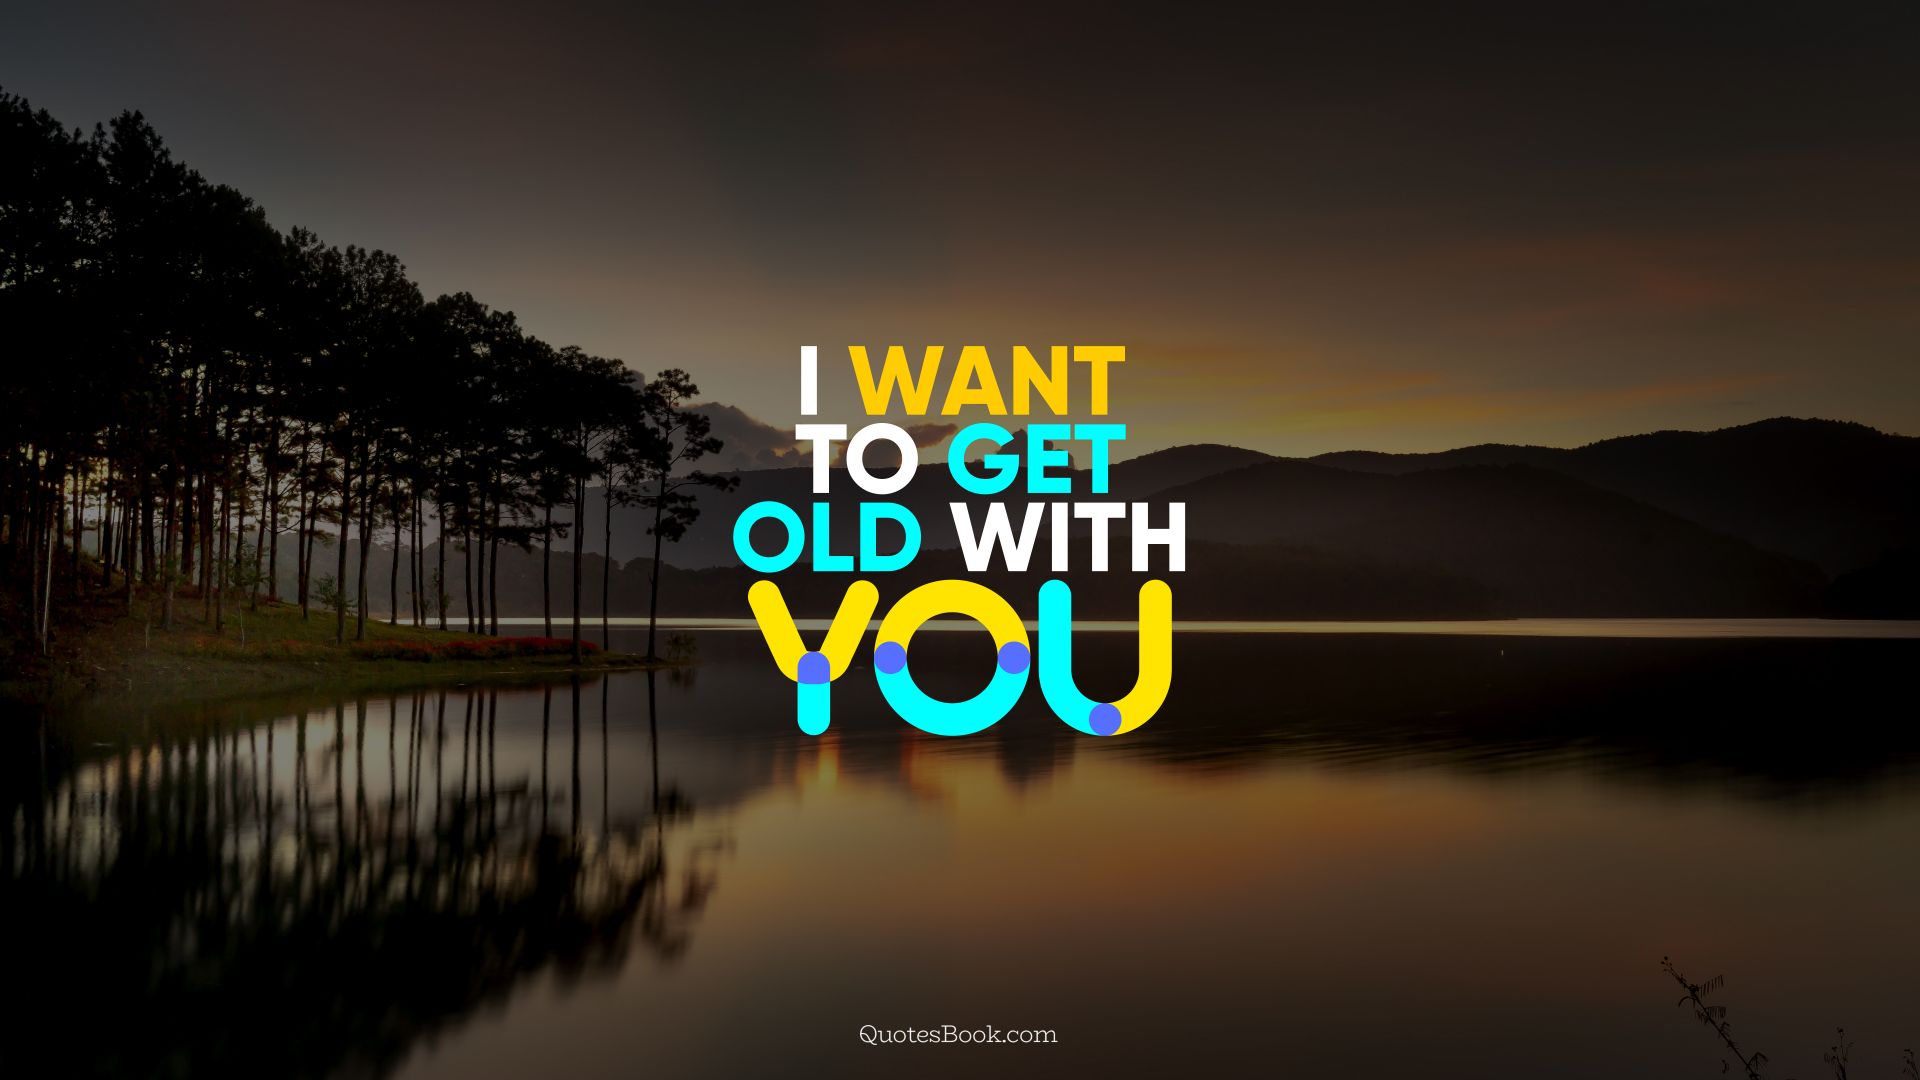 I want to get old with you. - Quote by QuotesBook